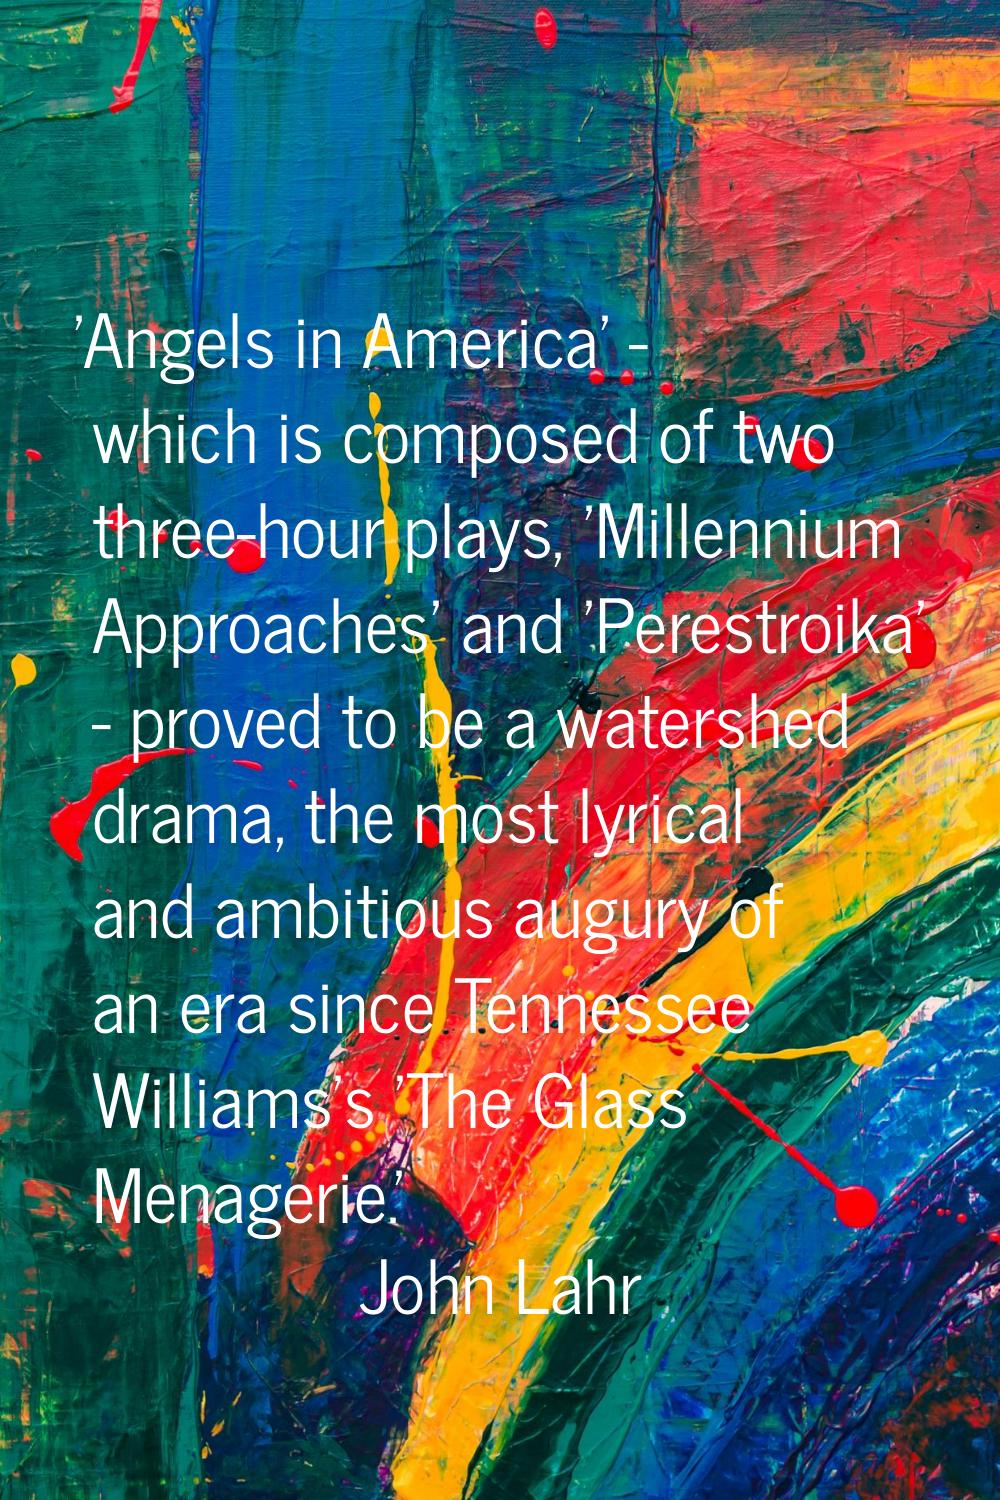 'Angels in America' - which is composed of two three-hour plays, 'Millennium Approaches' and 'Peres